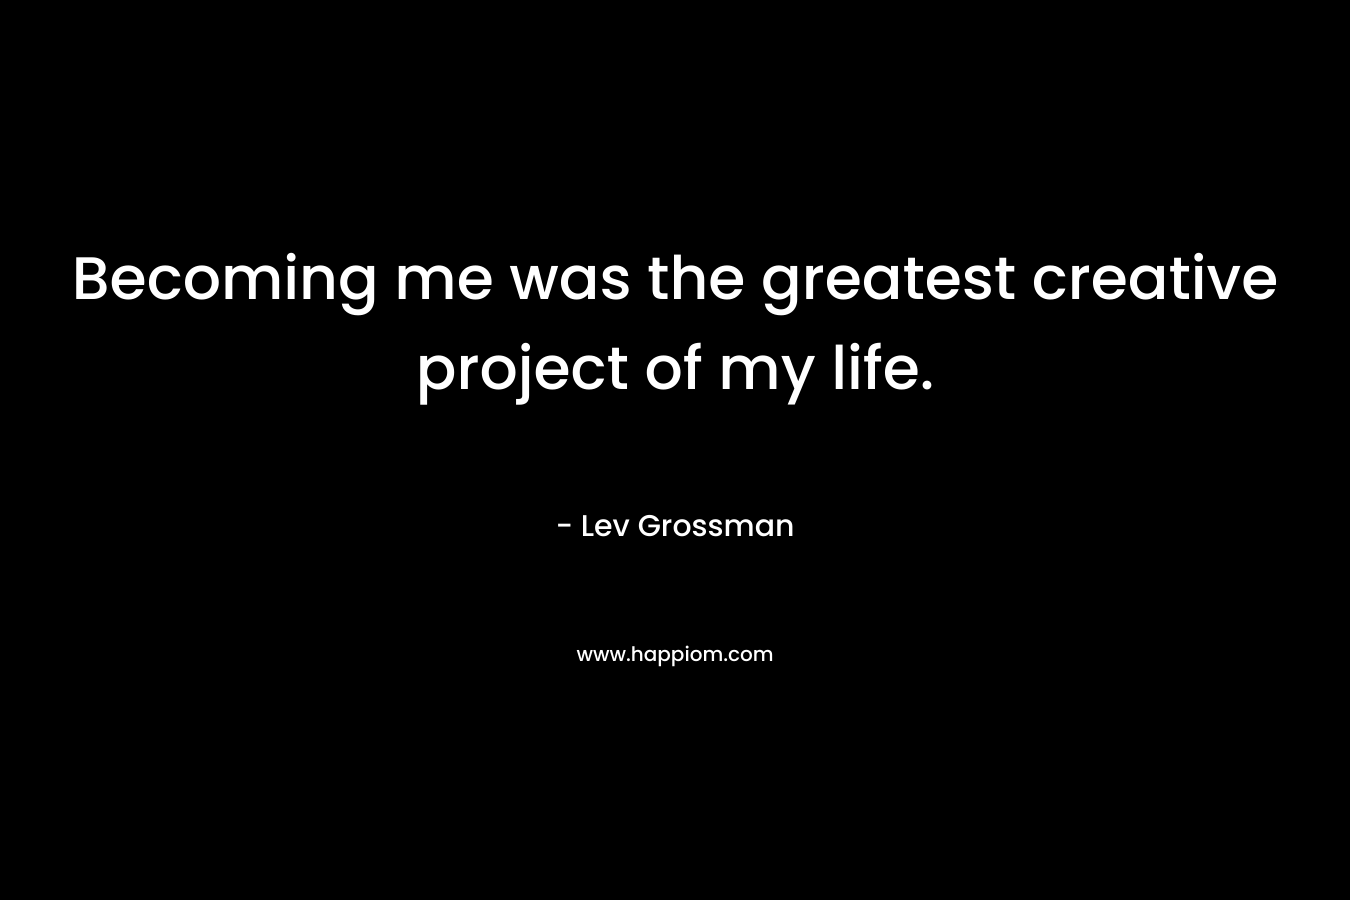 Becoming me was the greatest creative project of my life. – Lev Grossman